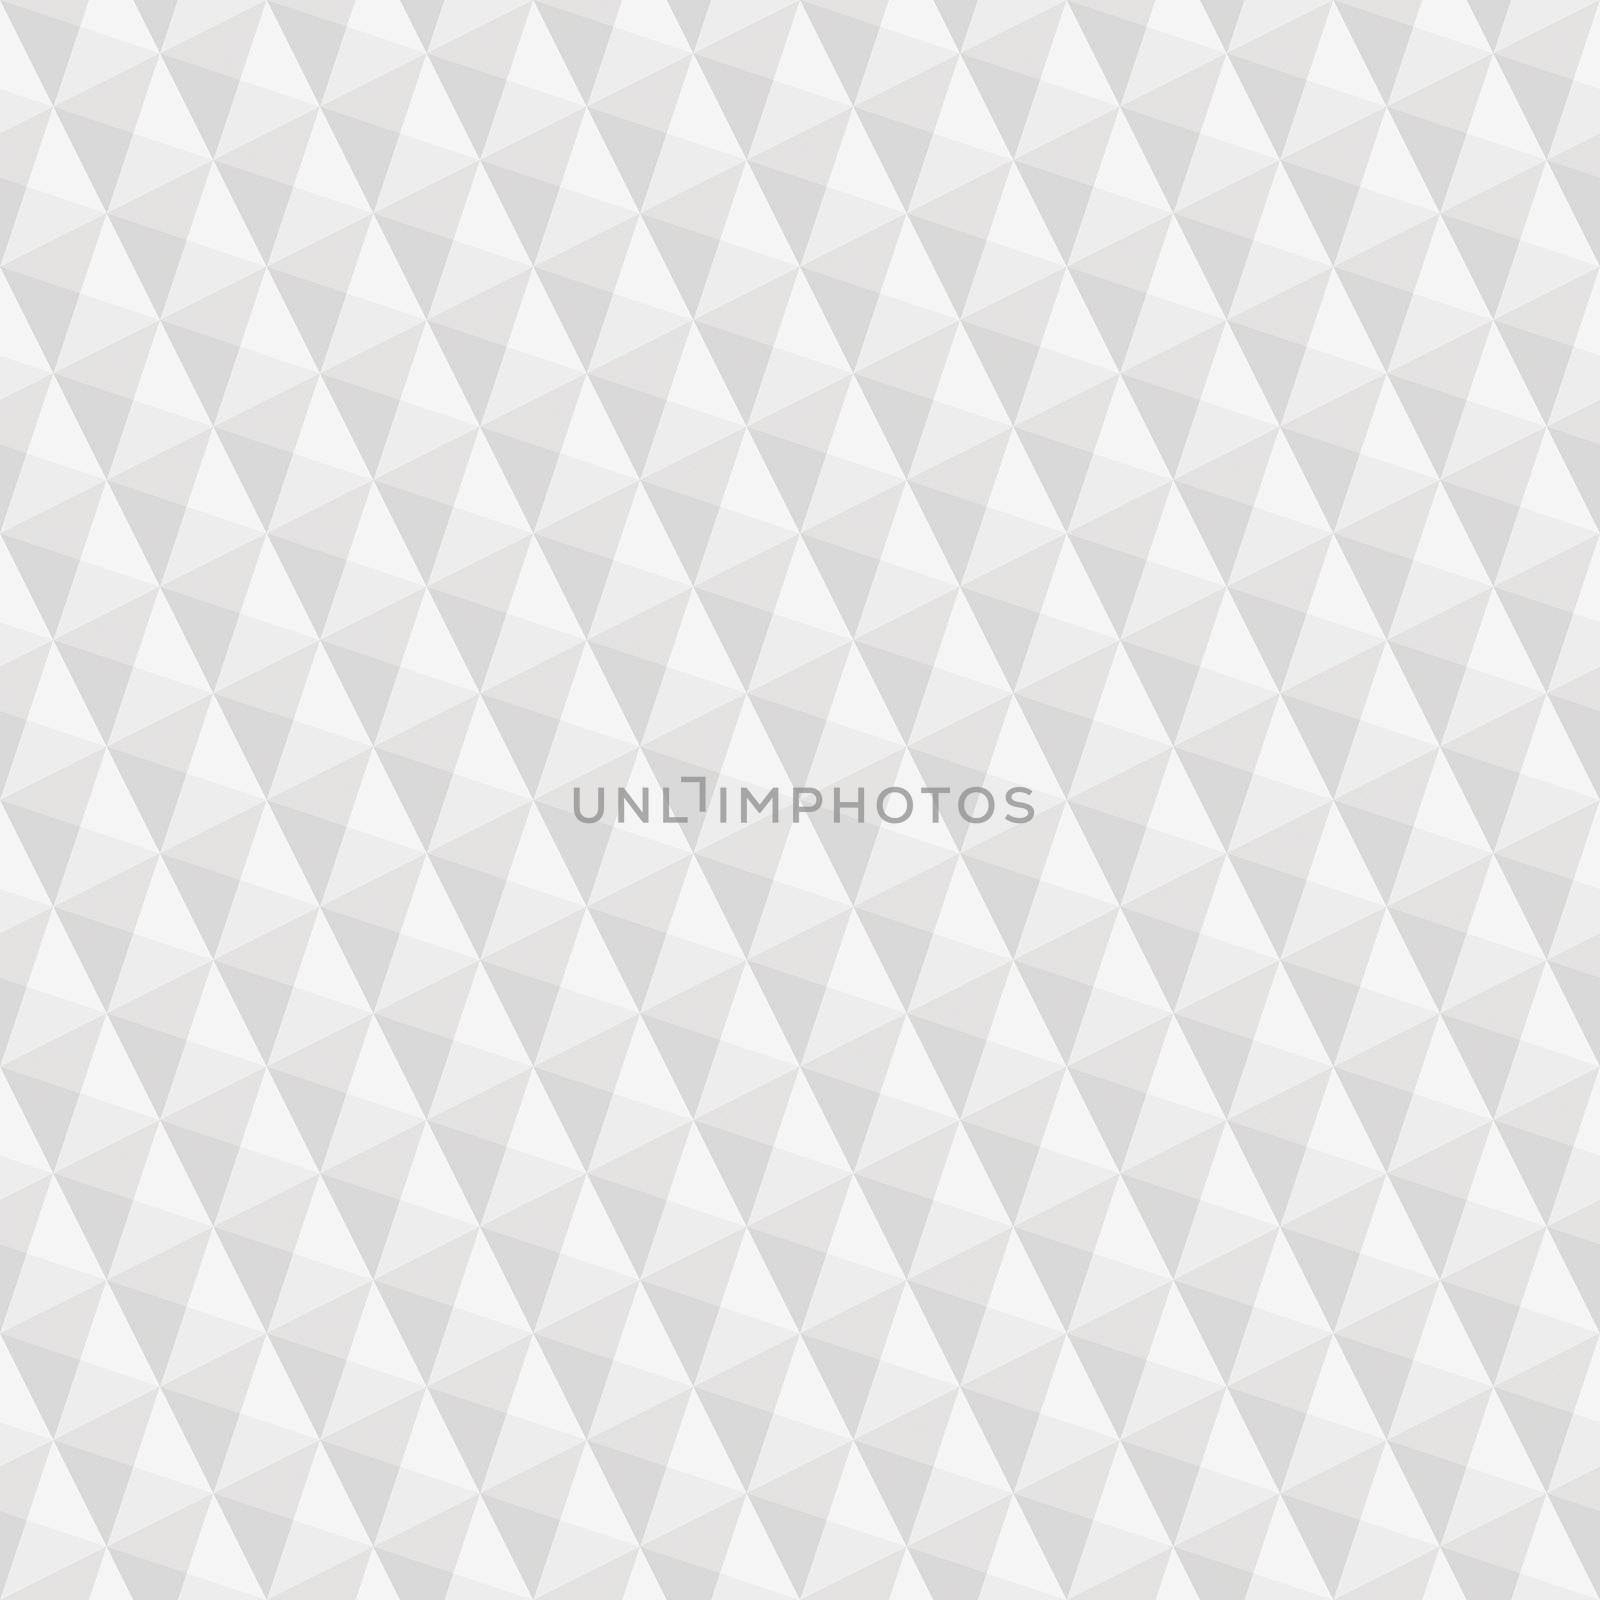 seamless texture of grey to white squares and triangles giving optical illusion